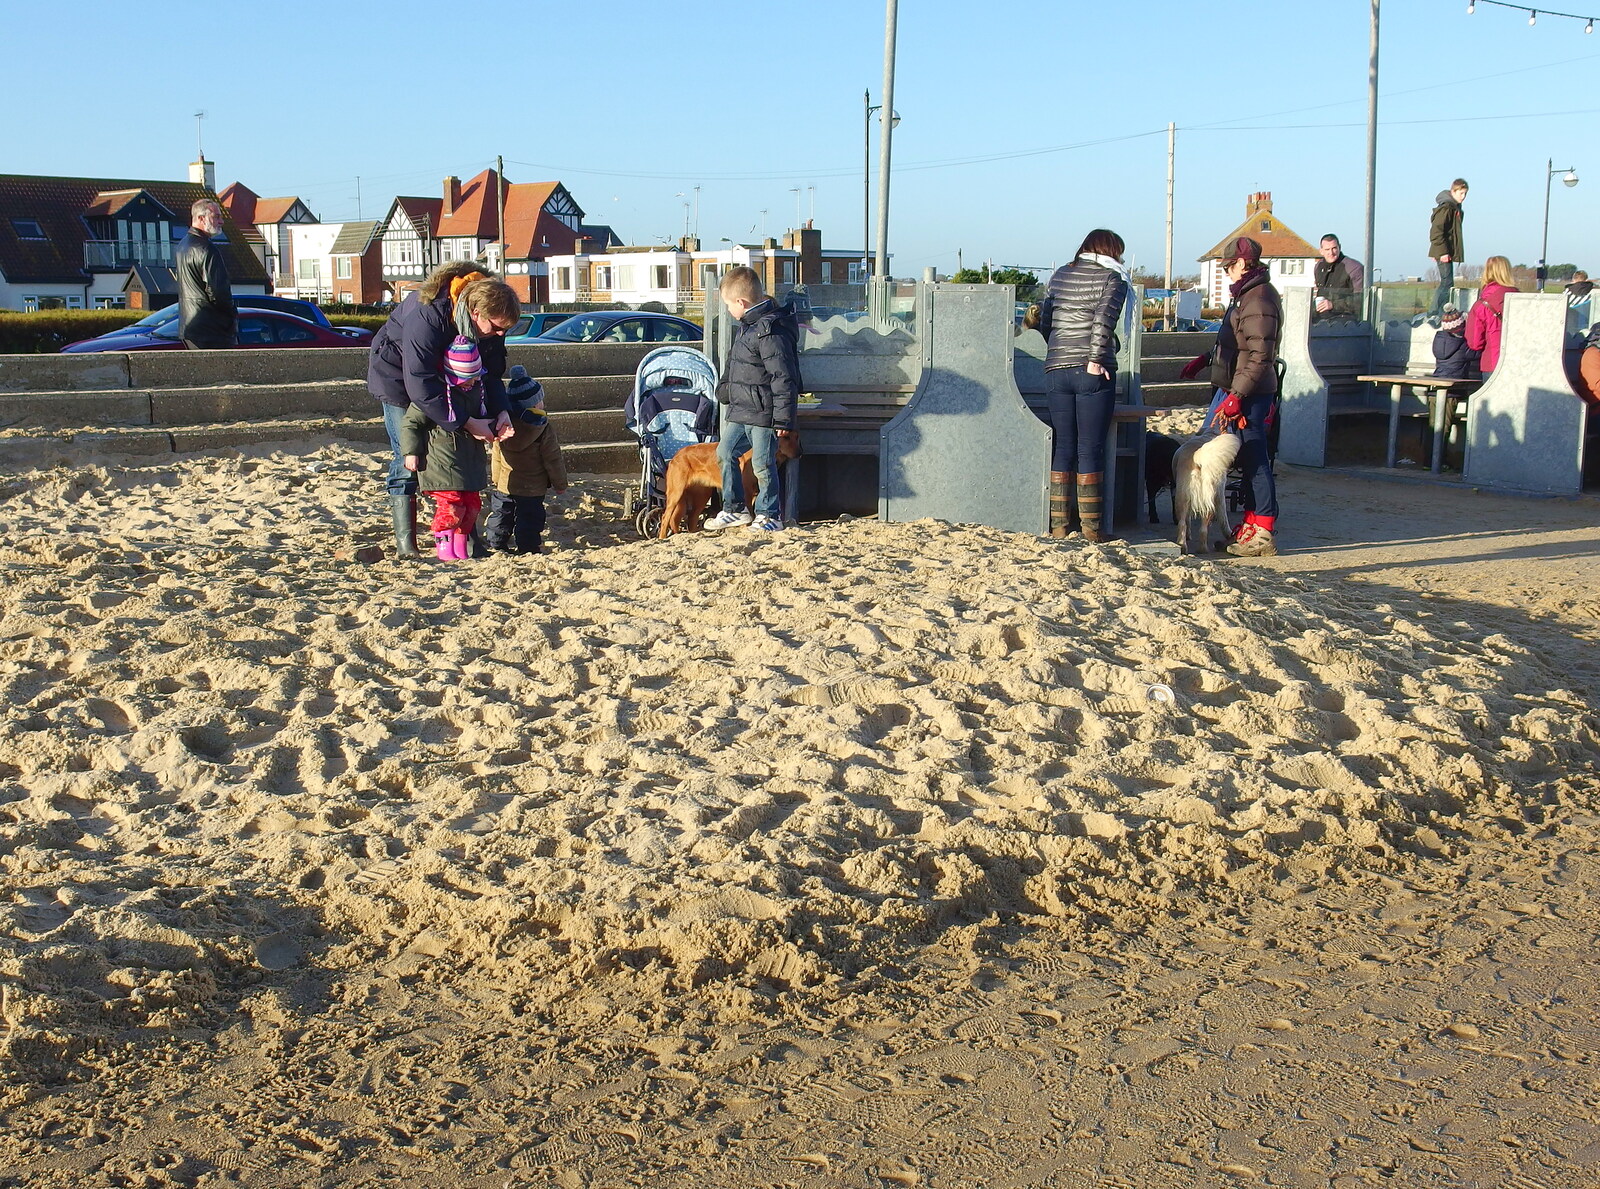 Recent storms have pushed sand onto the prom from Post-Christmas Southwold, Suffolk - 29th December 2013